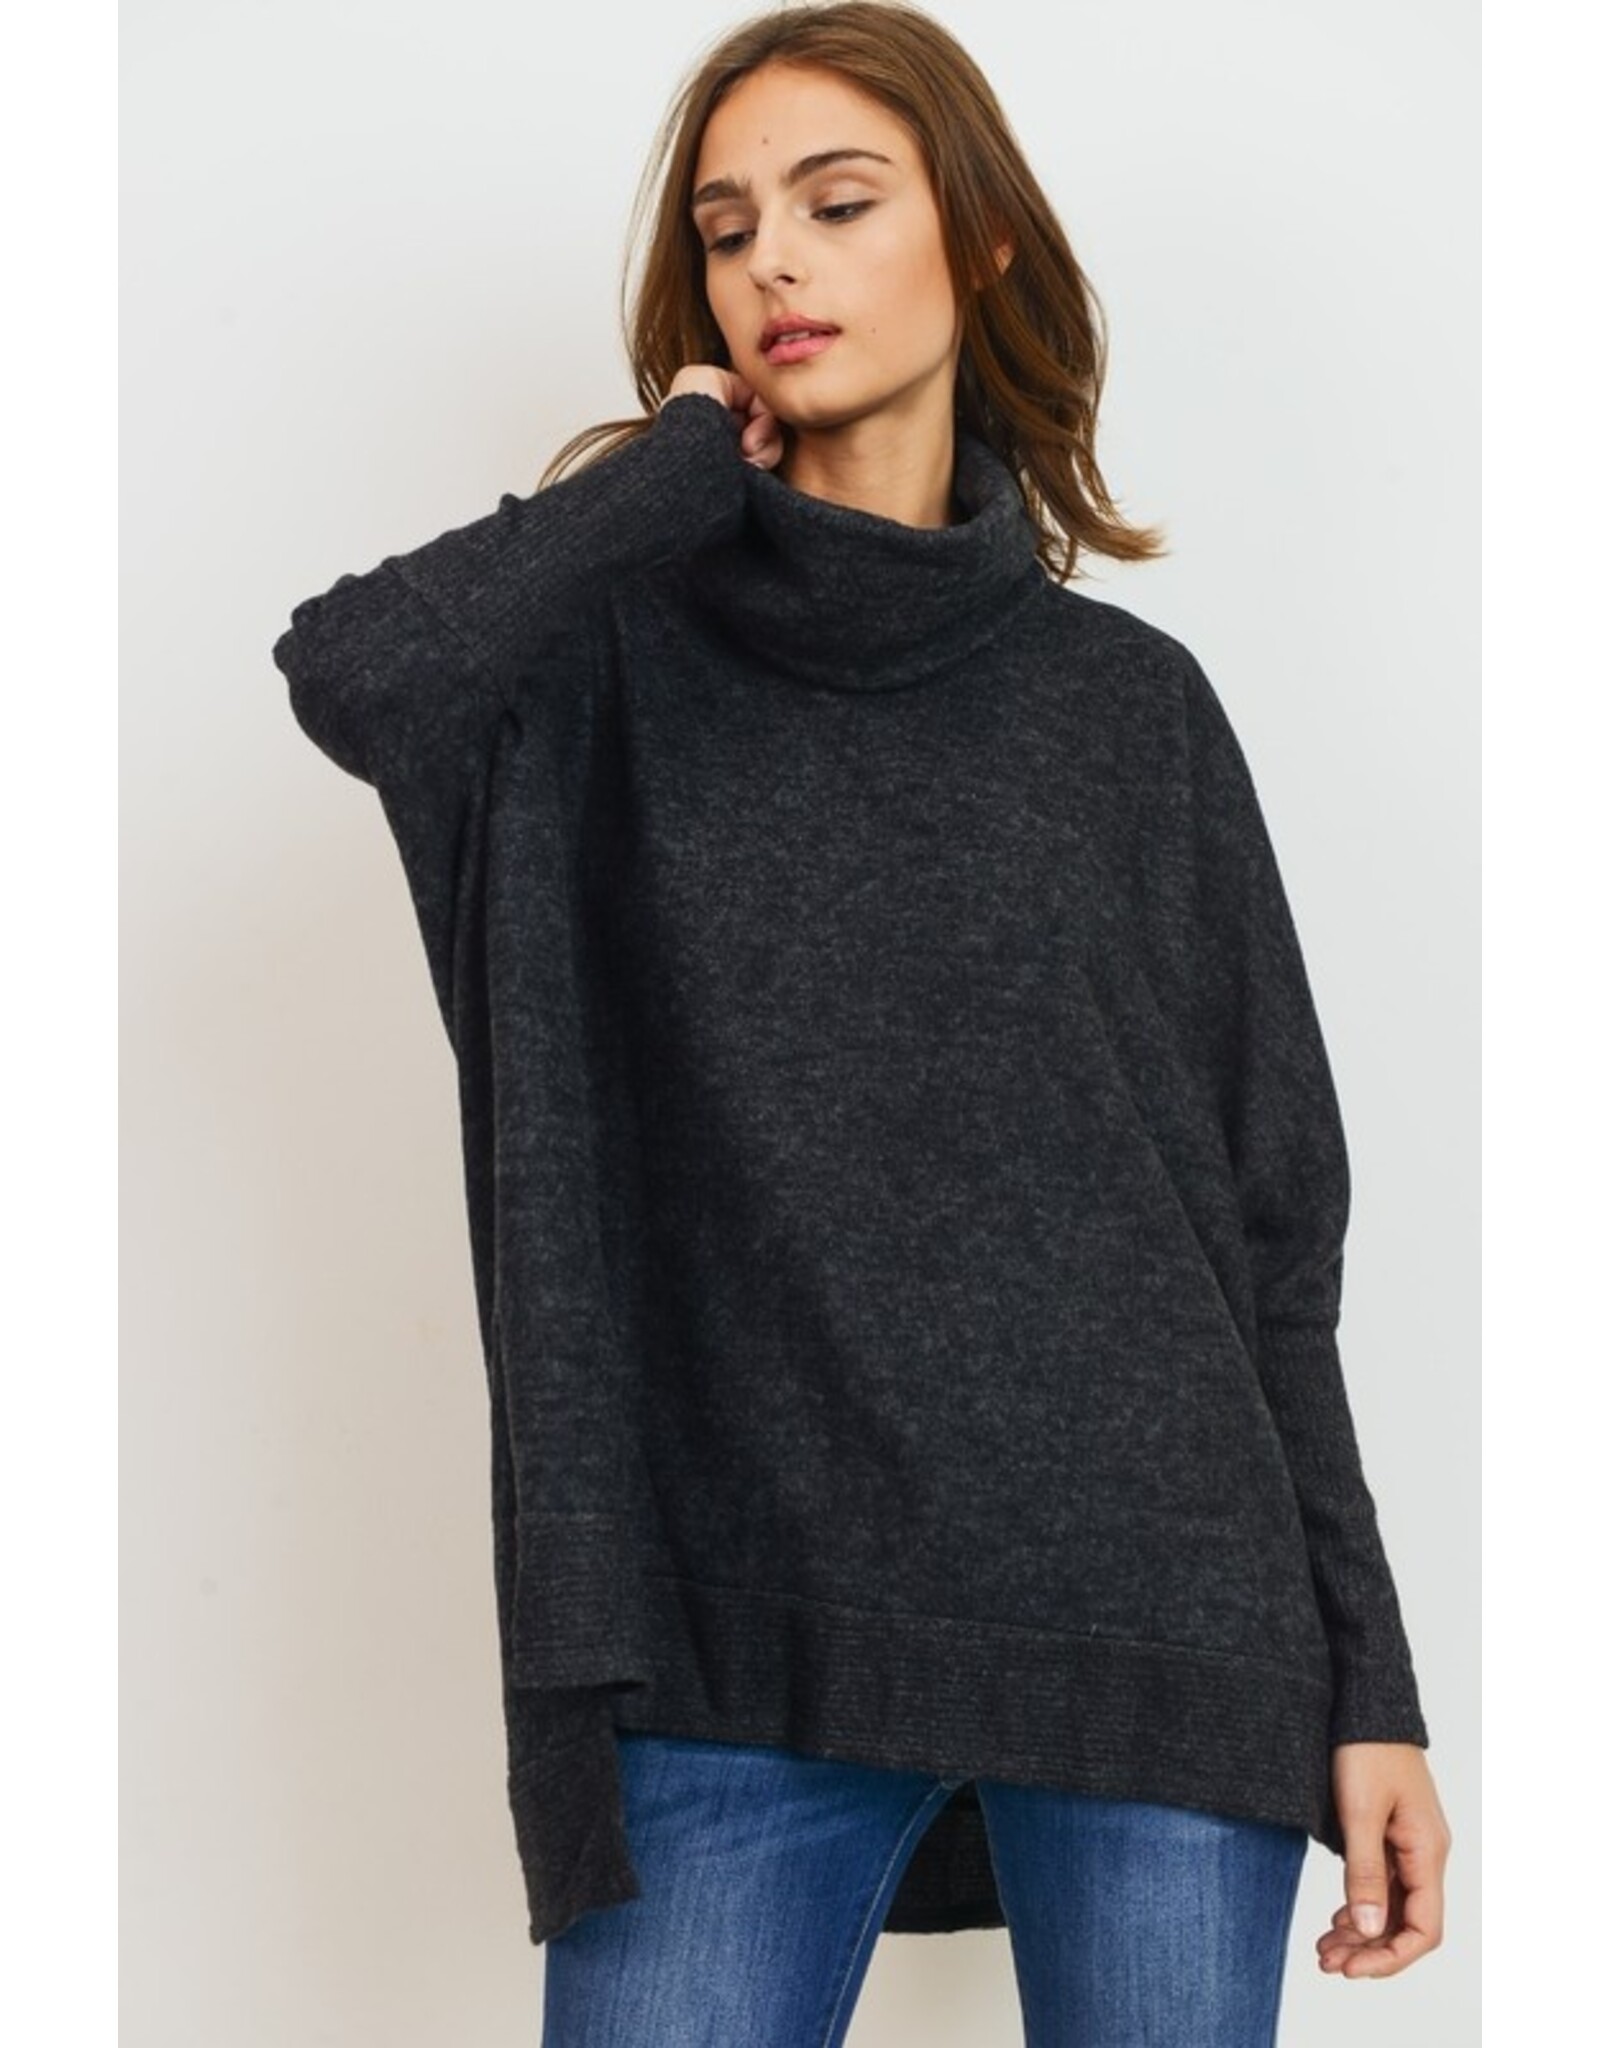 Charcoal relaxed cowl turtleneck tunic